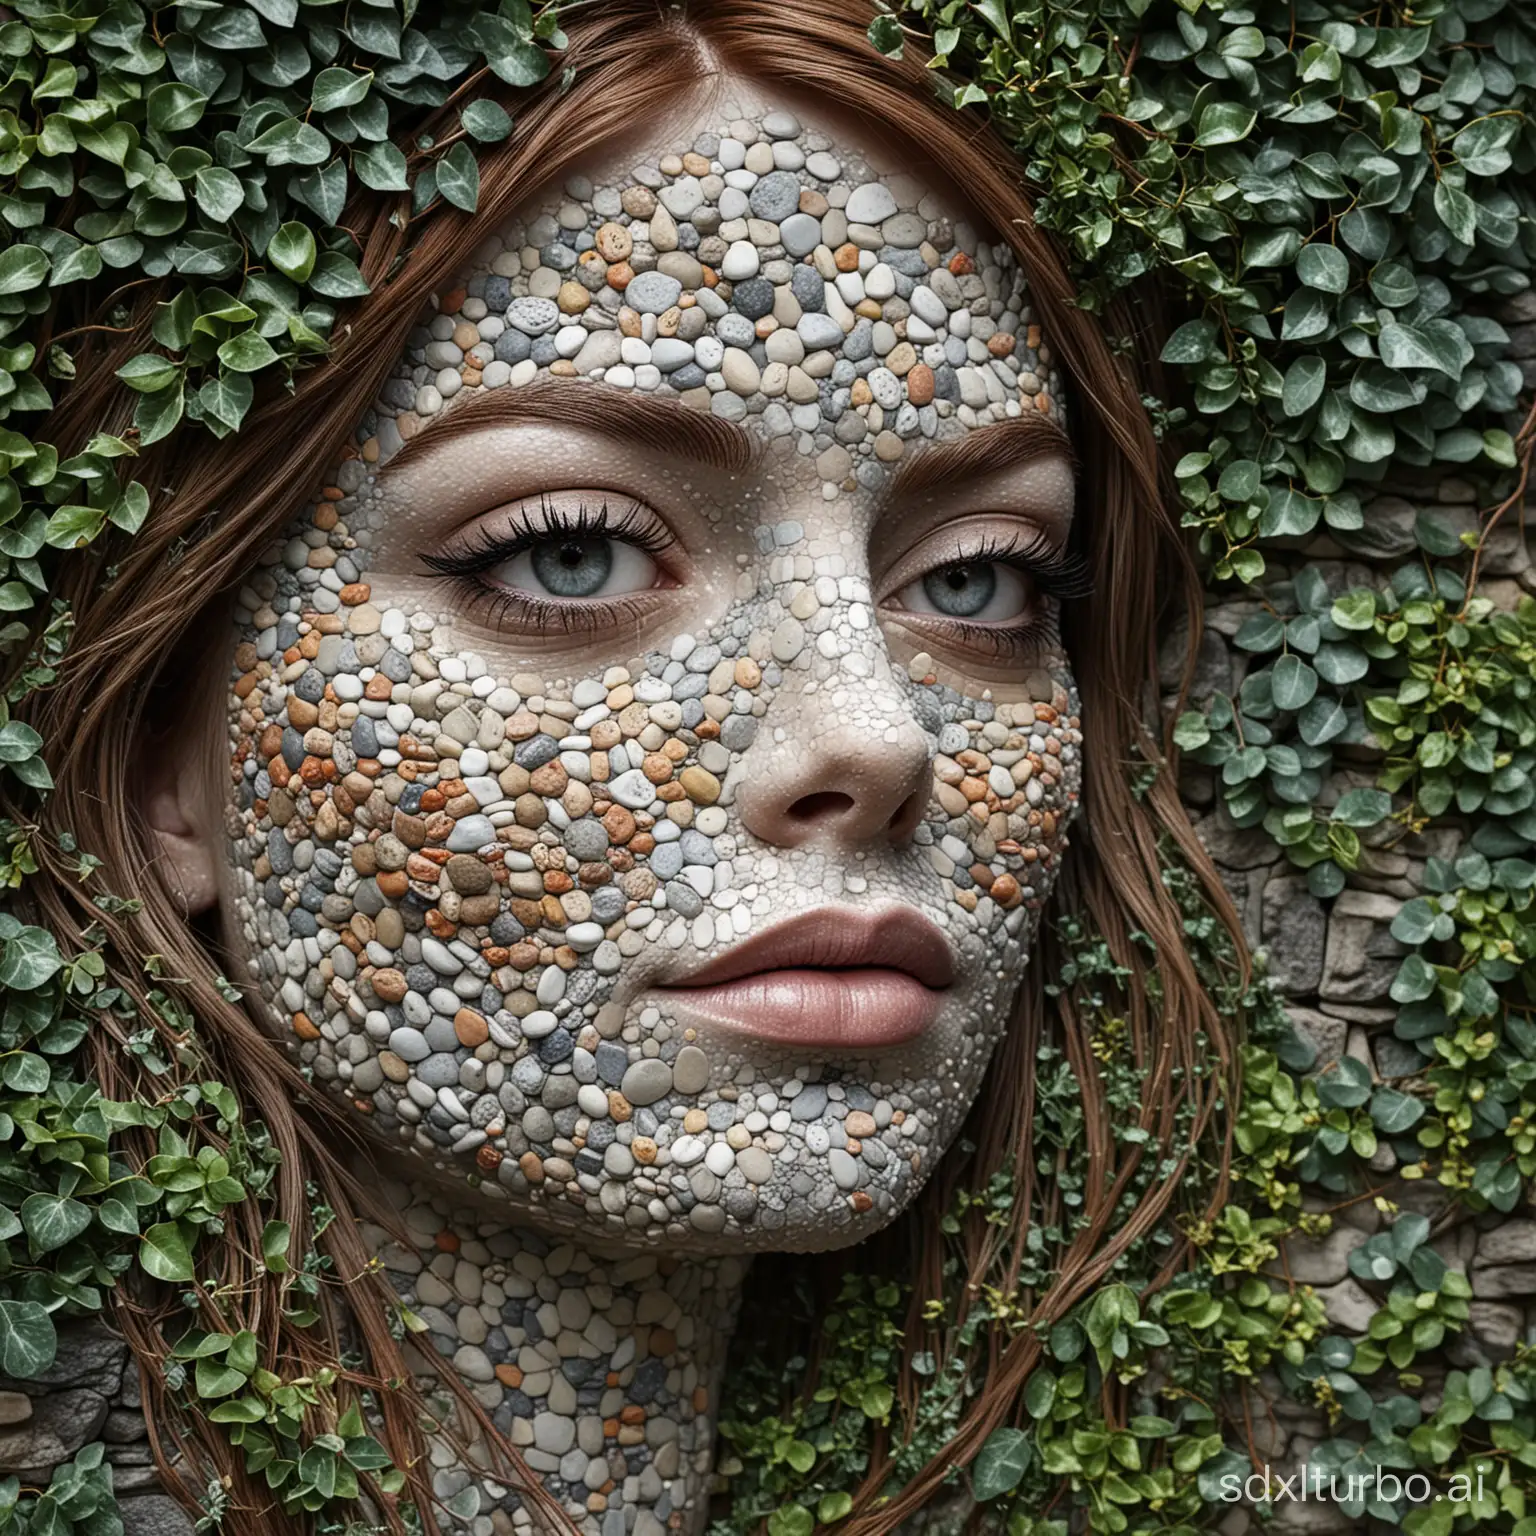 Woman's face ,like emma stone, intricately composed of assorted pebbles, each stone meticulously placed to define facial features, mosaic texture, shades of grey and hints of color in some stones, sunlight accentuating the contours, laid upon a rustic outdoor wall with creeping ivy, macro photography style, highly detailed, dramatic lighting, ultra fine